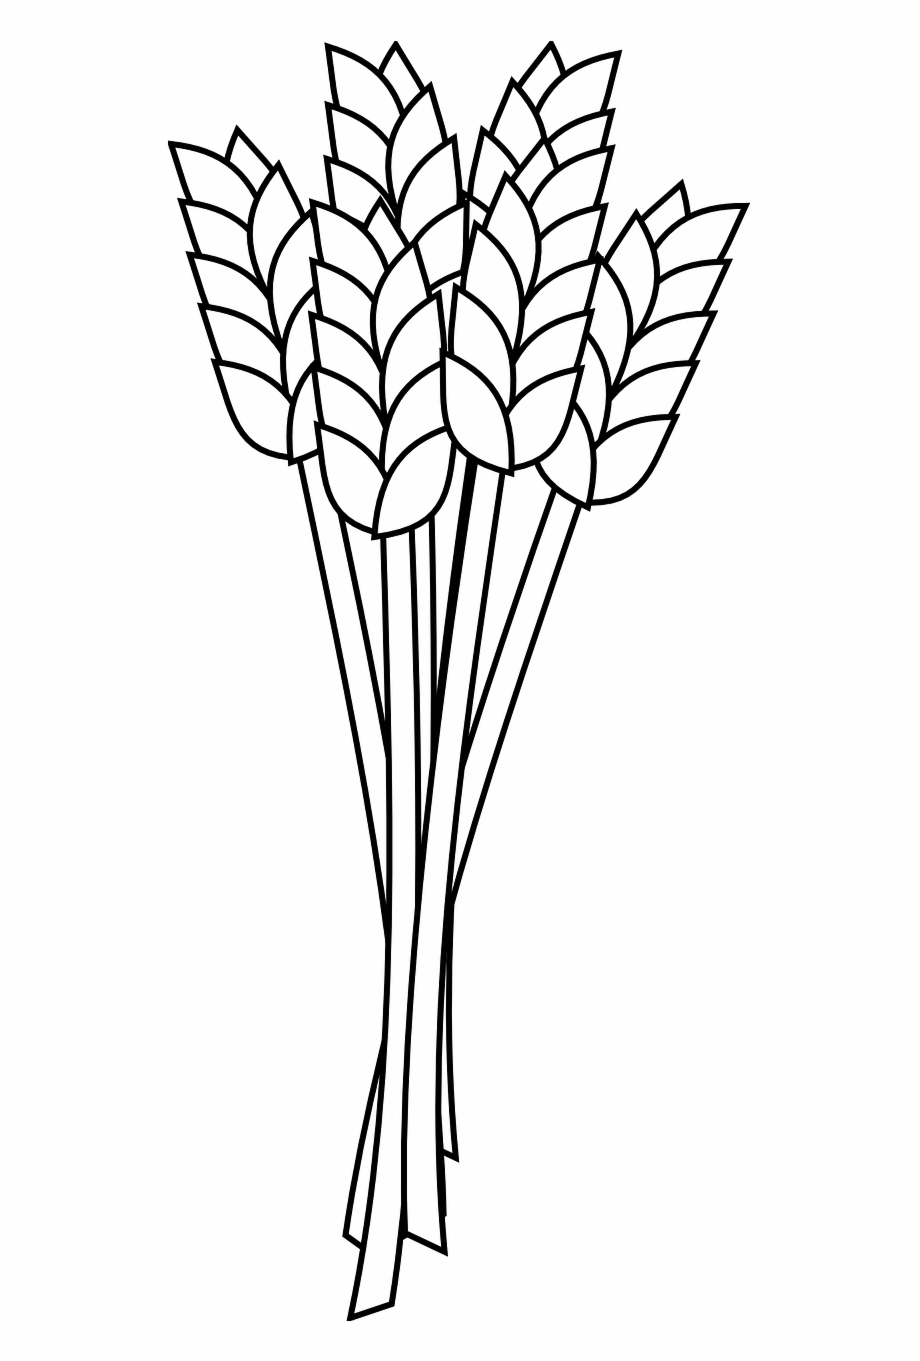 Wheat Grain Agriculture Crop Png Image Wheat Clipart